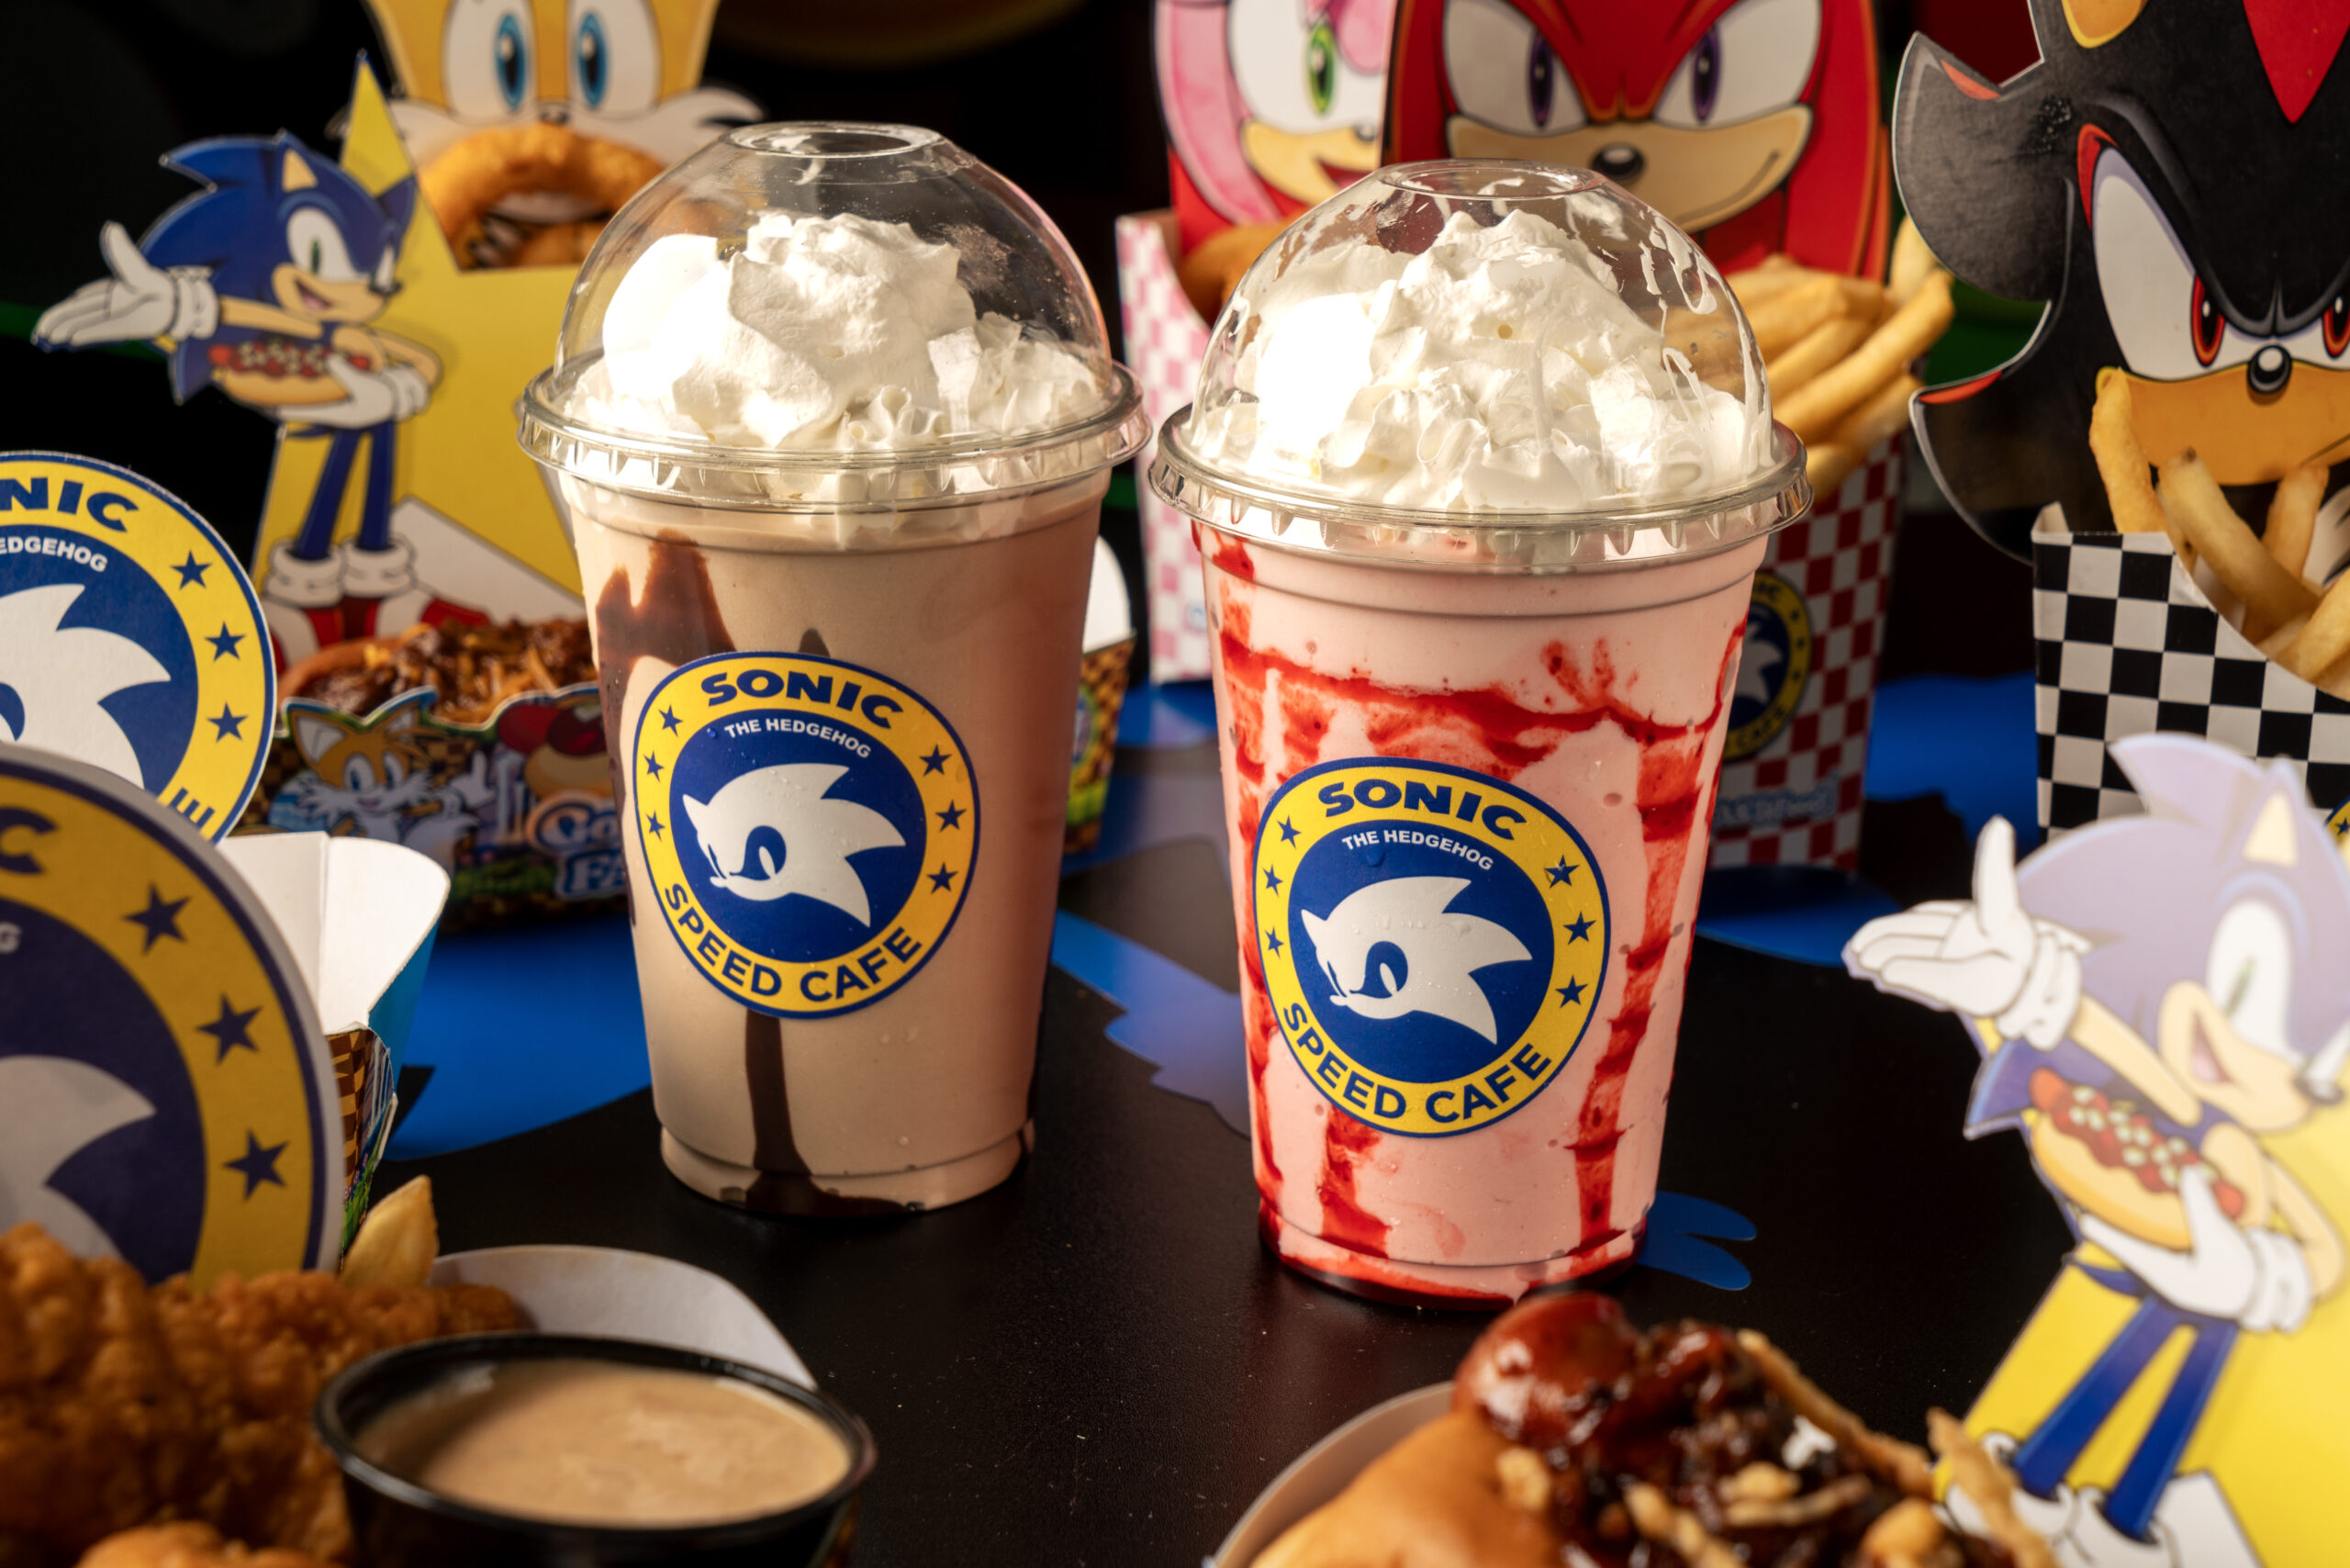 Sonic the Hedgehog Speed Cafe Races into Katy for a Fusion of Classic Gaming and Culinary Adventures